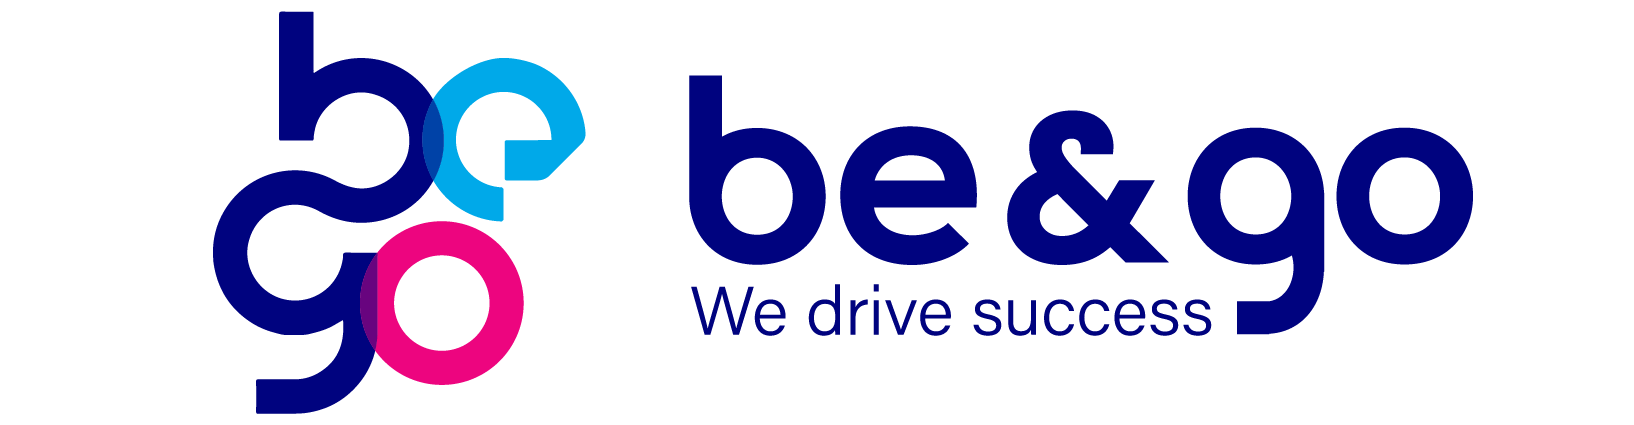 Be and Go logo